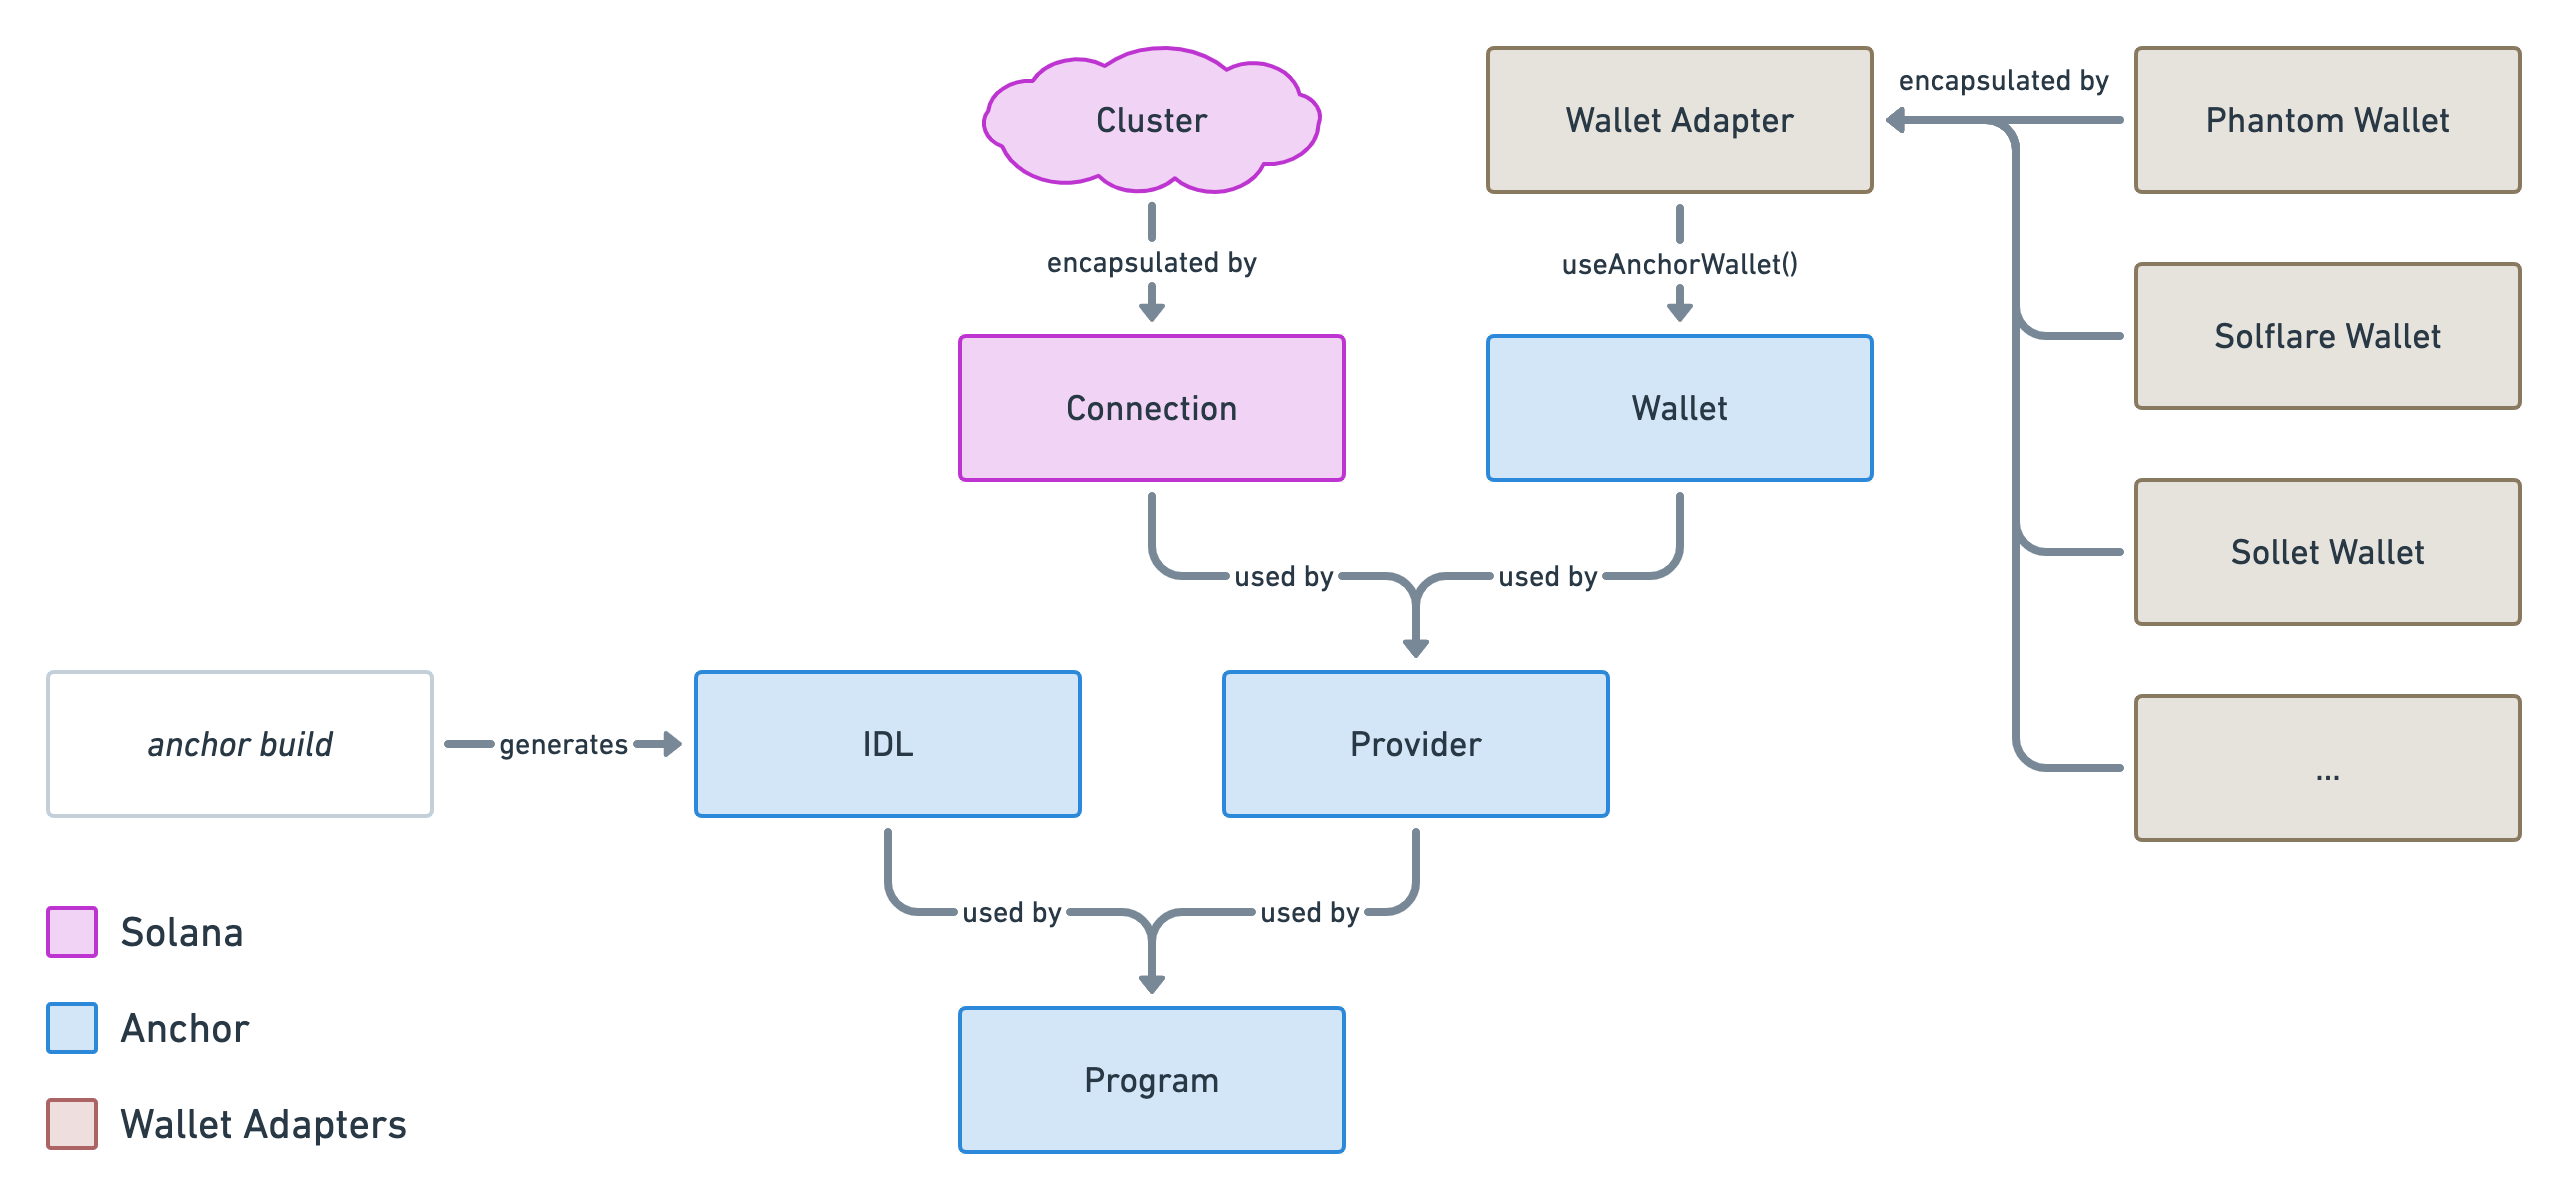 Previous diagram using "useAnchorWallet()" to connect "WalletAdapter" with the "Wallet" object from Anchor.